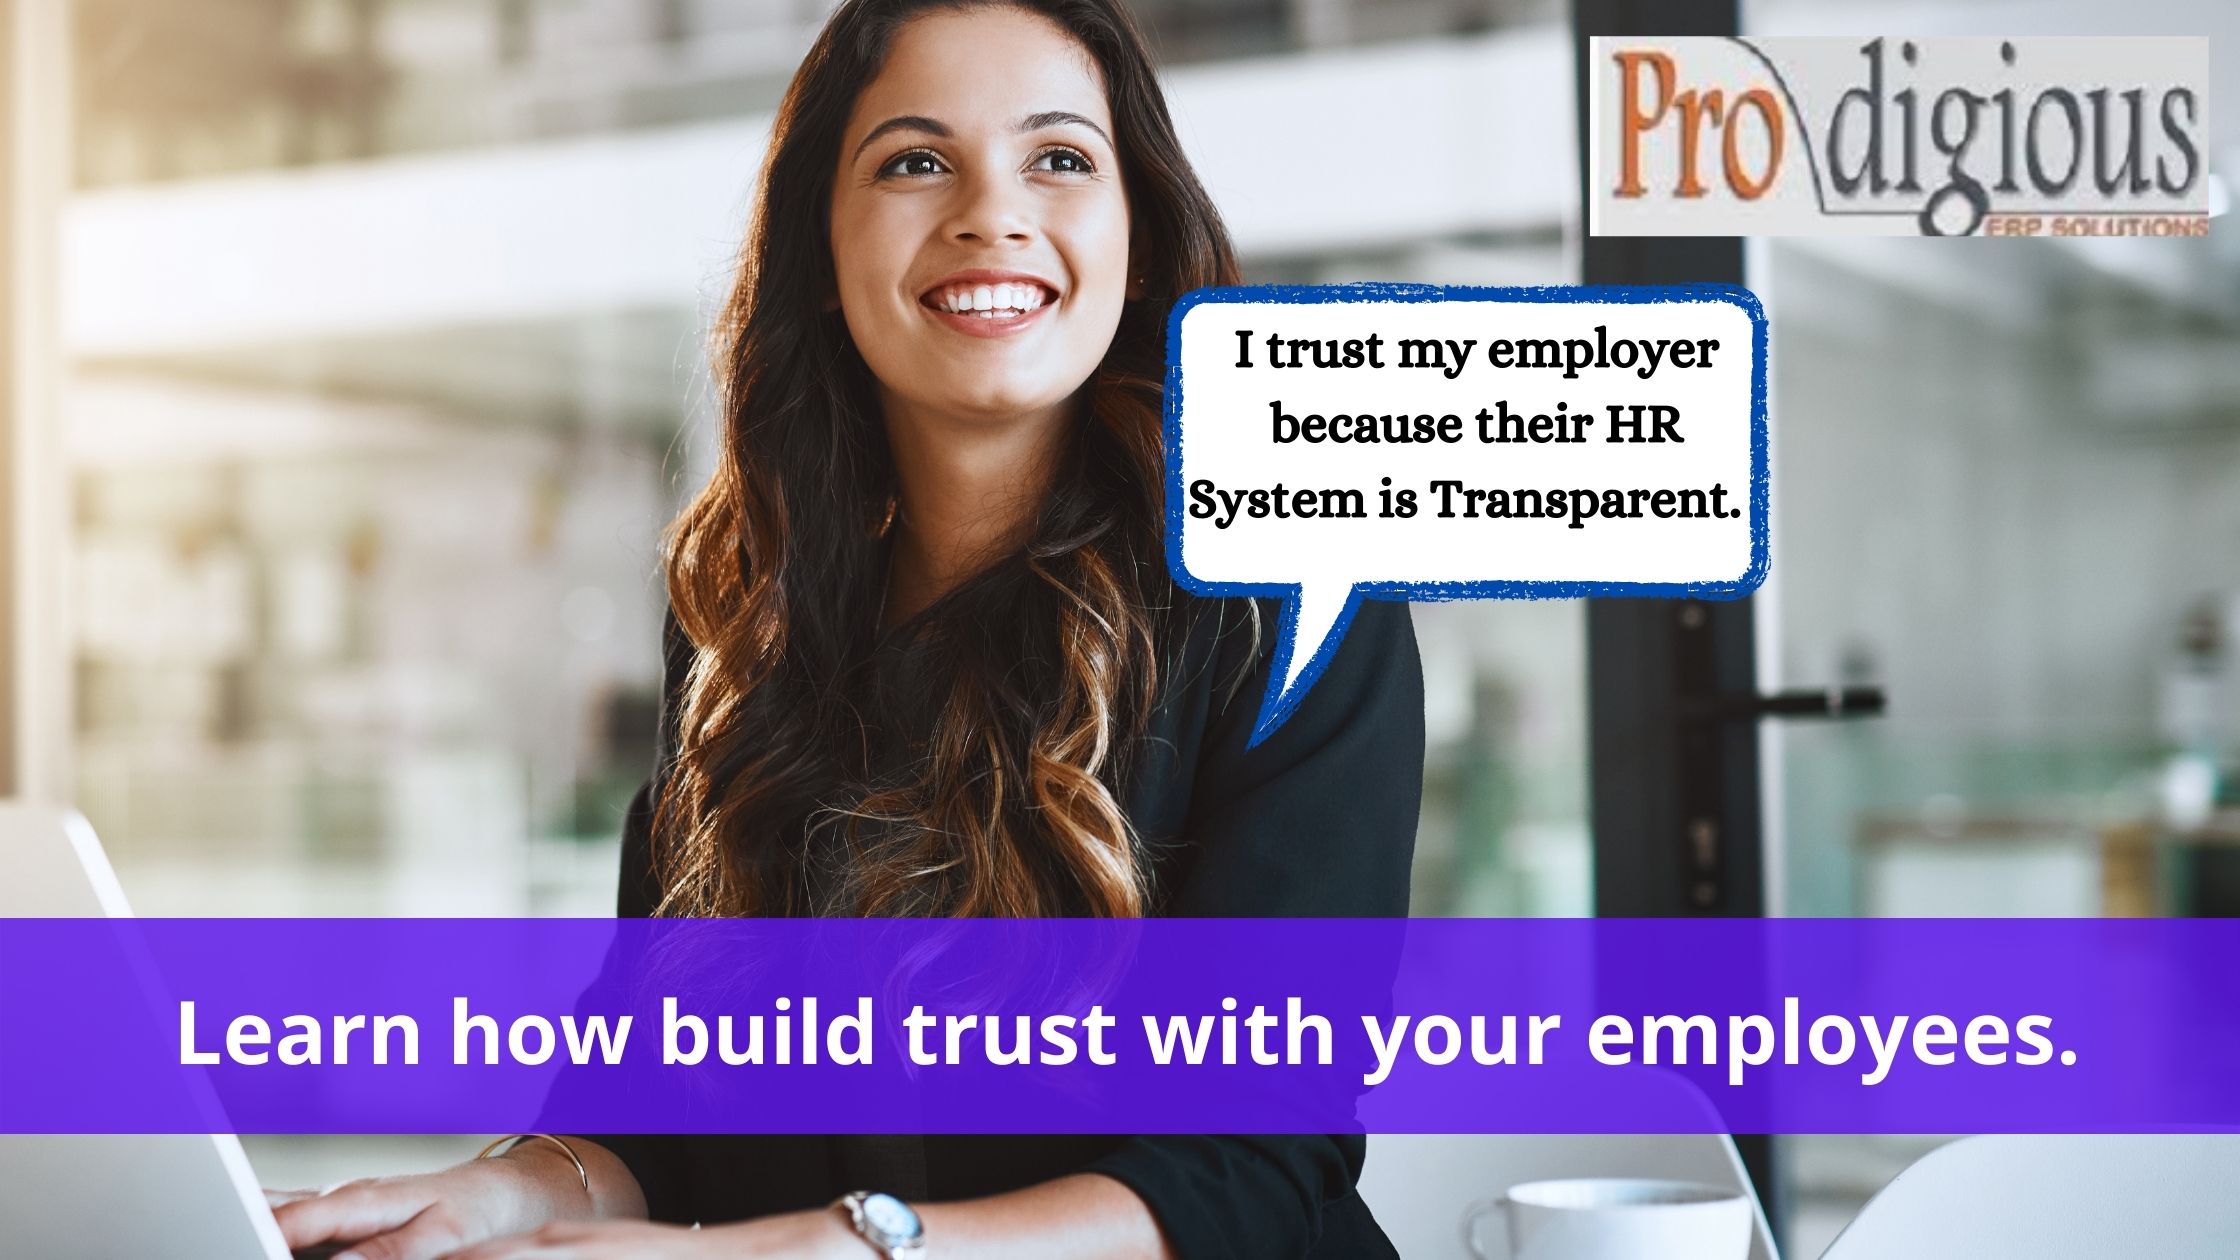 How build trust with your employees?